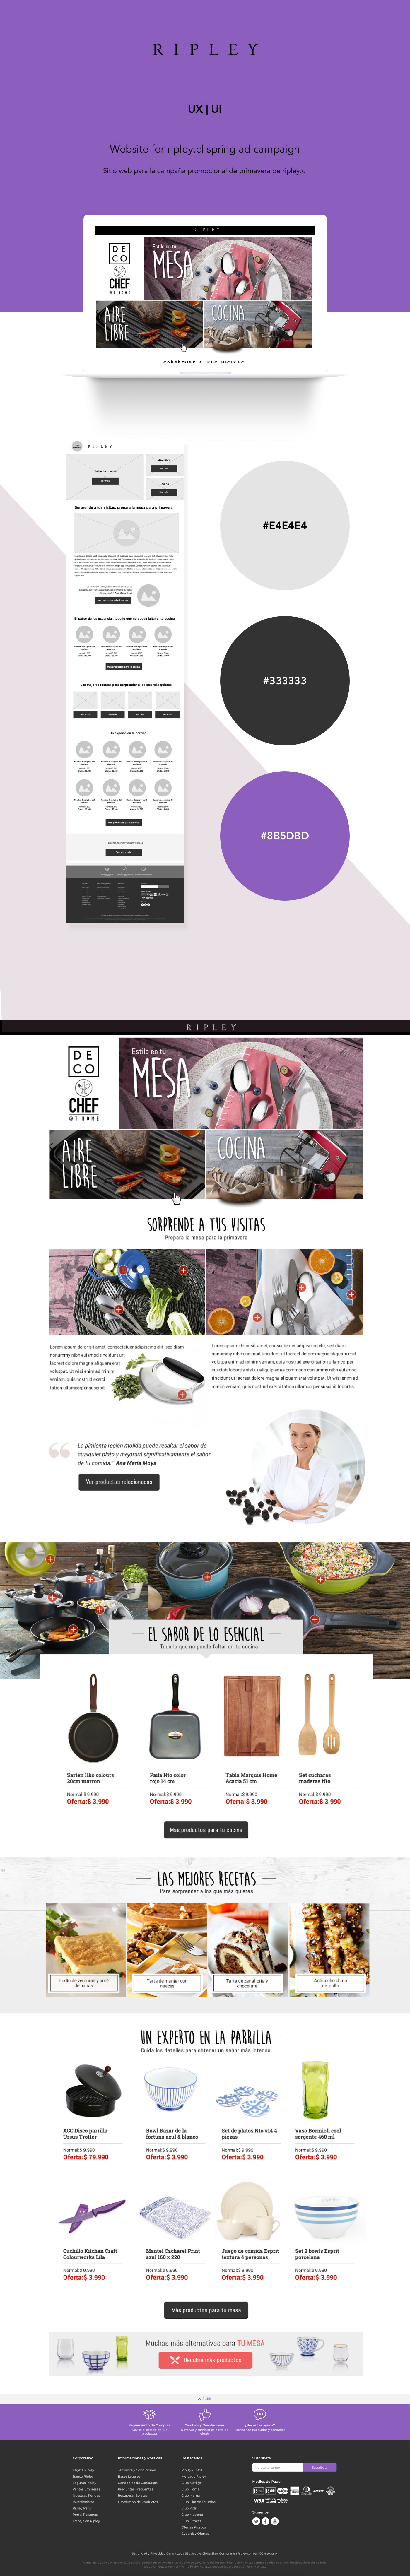 chef design Ecommerce site UI Usability user experience ux Website wireframes